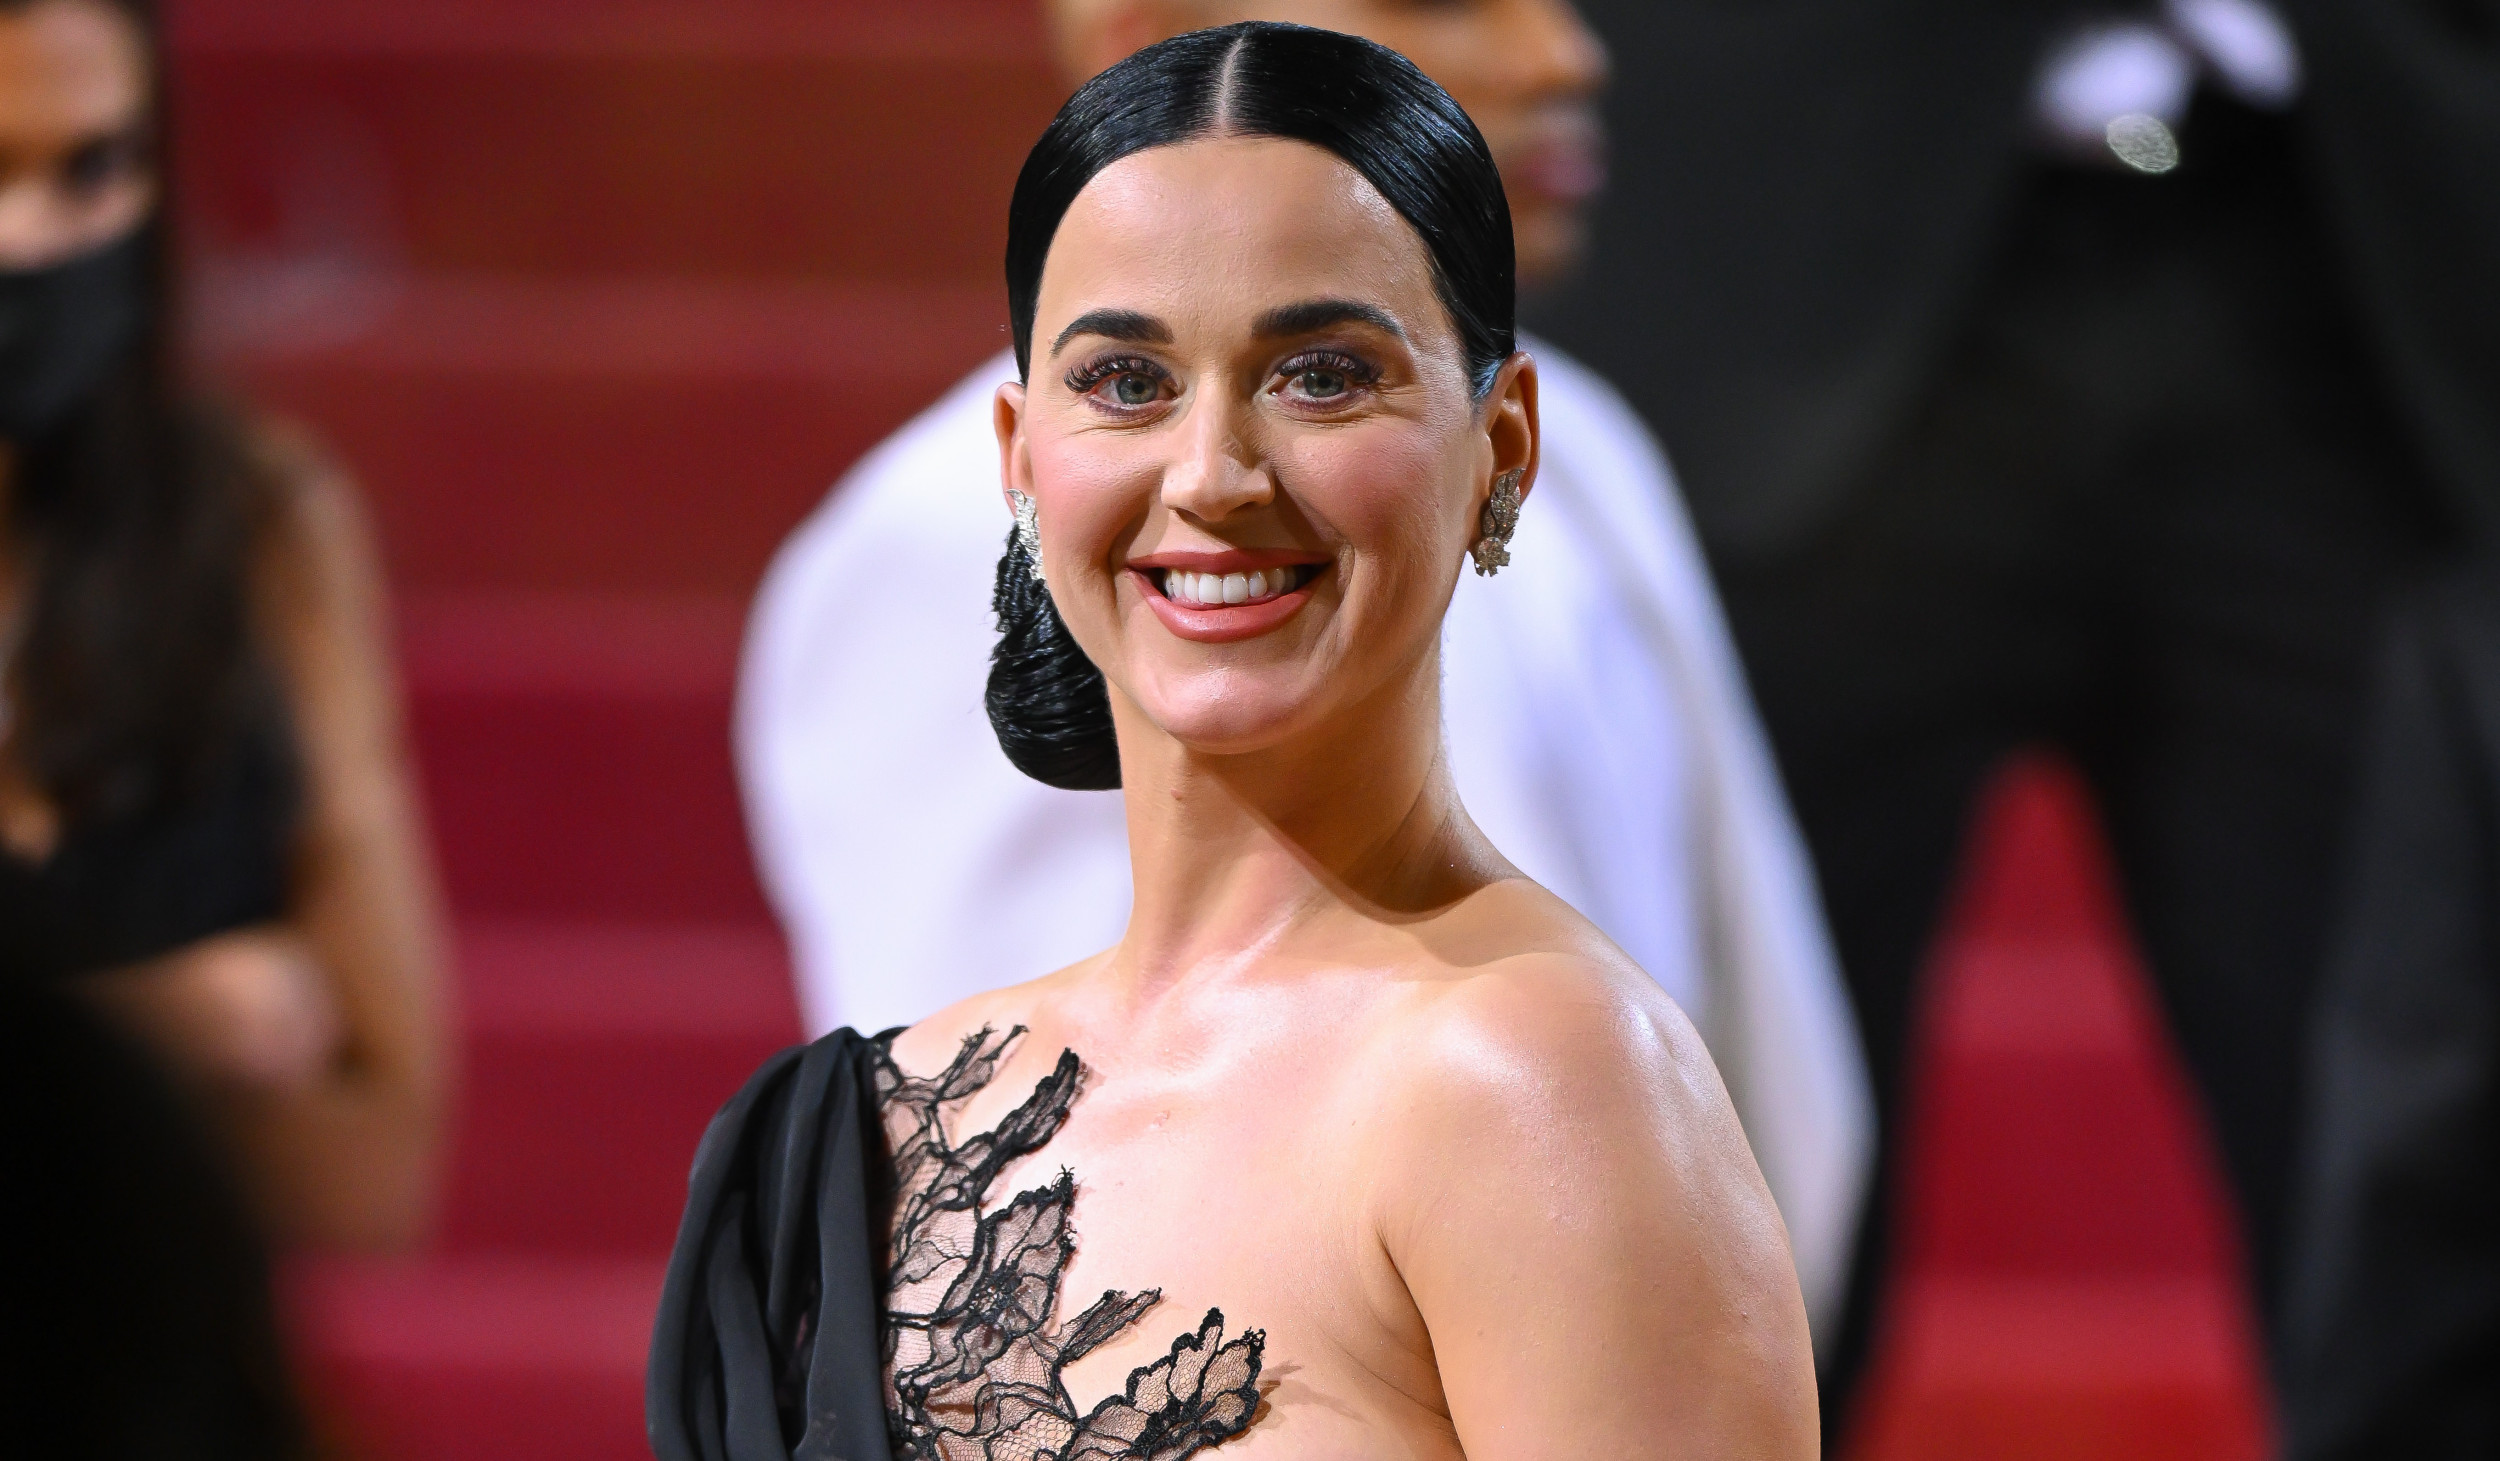 Fact Check: Did Katy Perry Have an Eye 'Glitch' Due to Covid Vaccine?